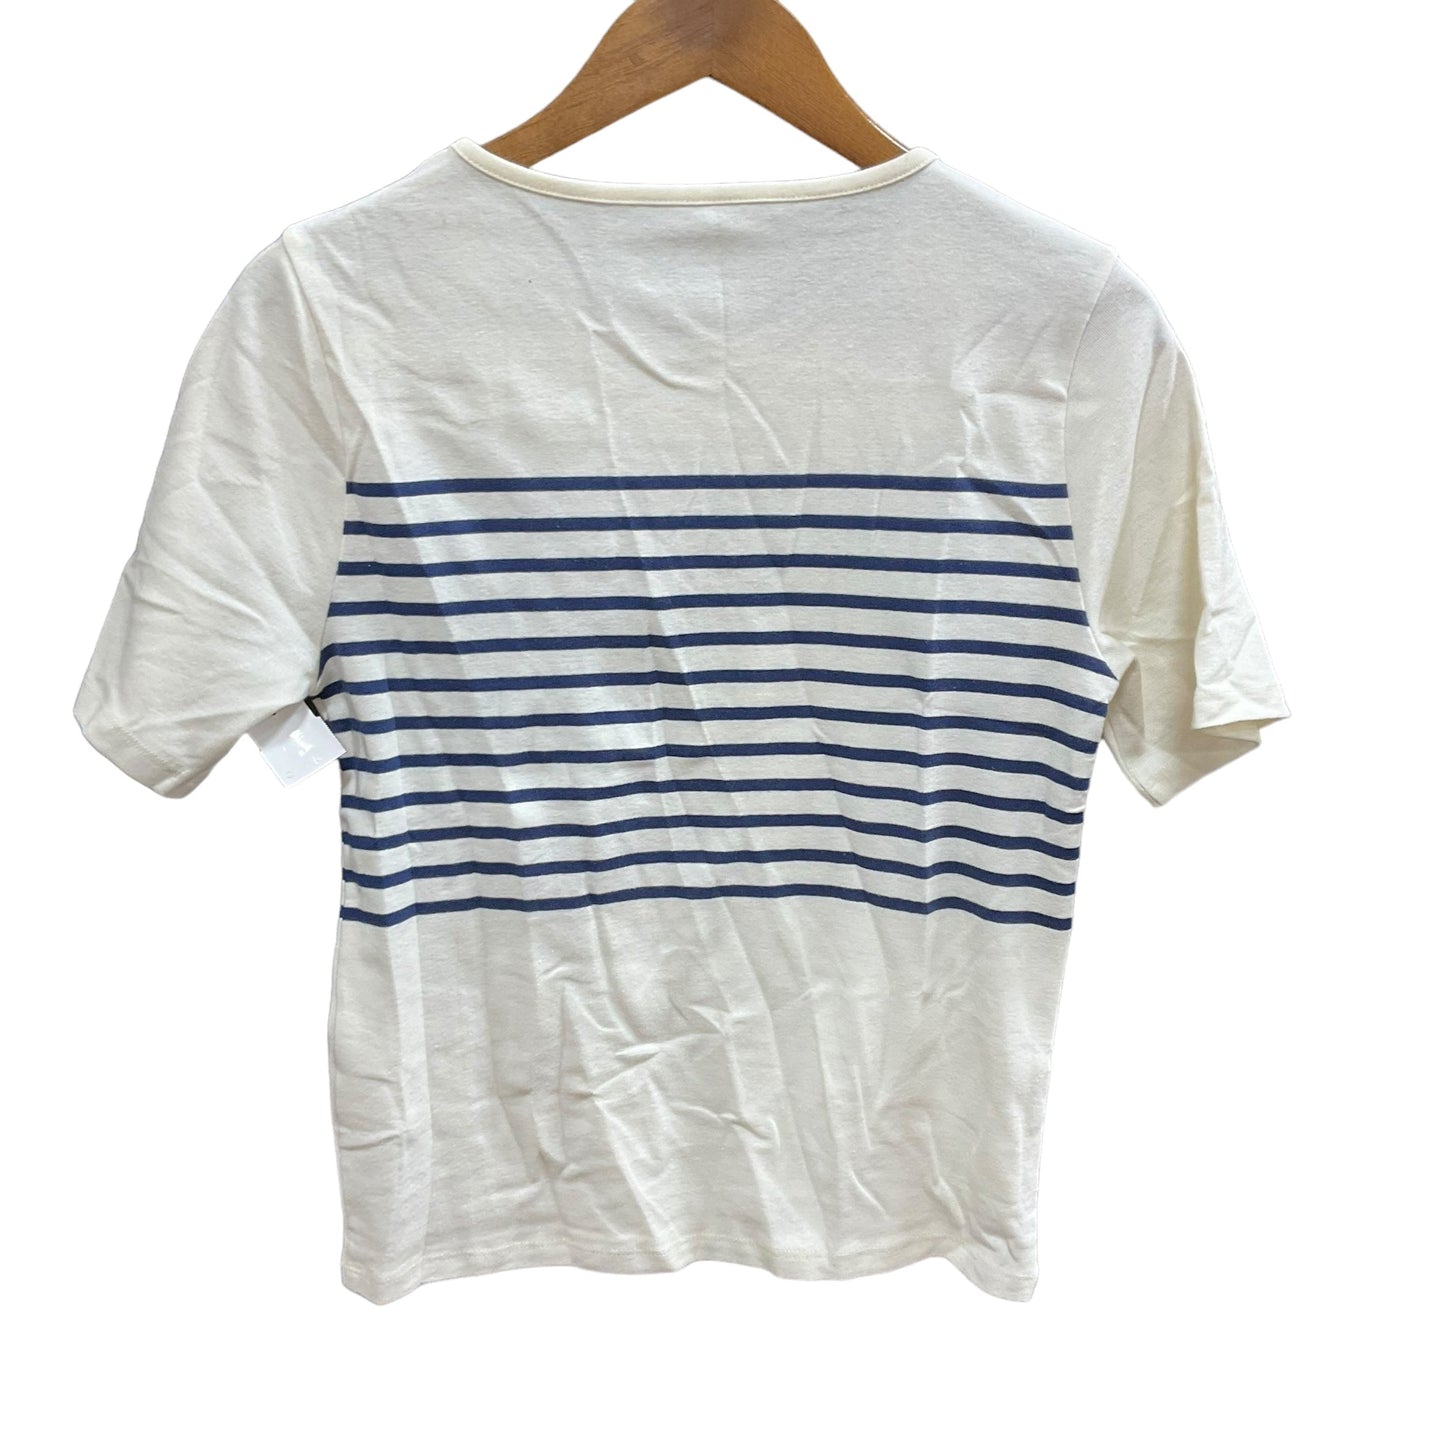 Top Short Sleeve By J. Crew  Size: L